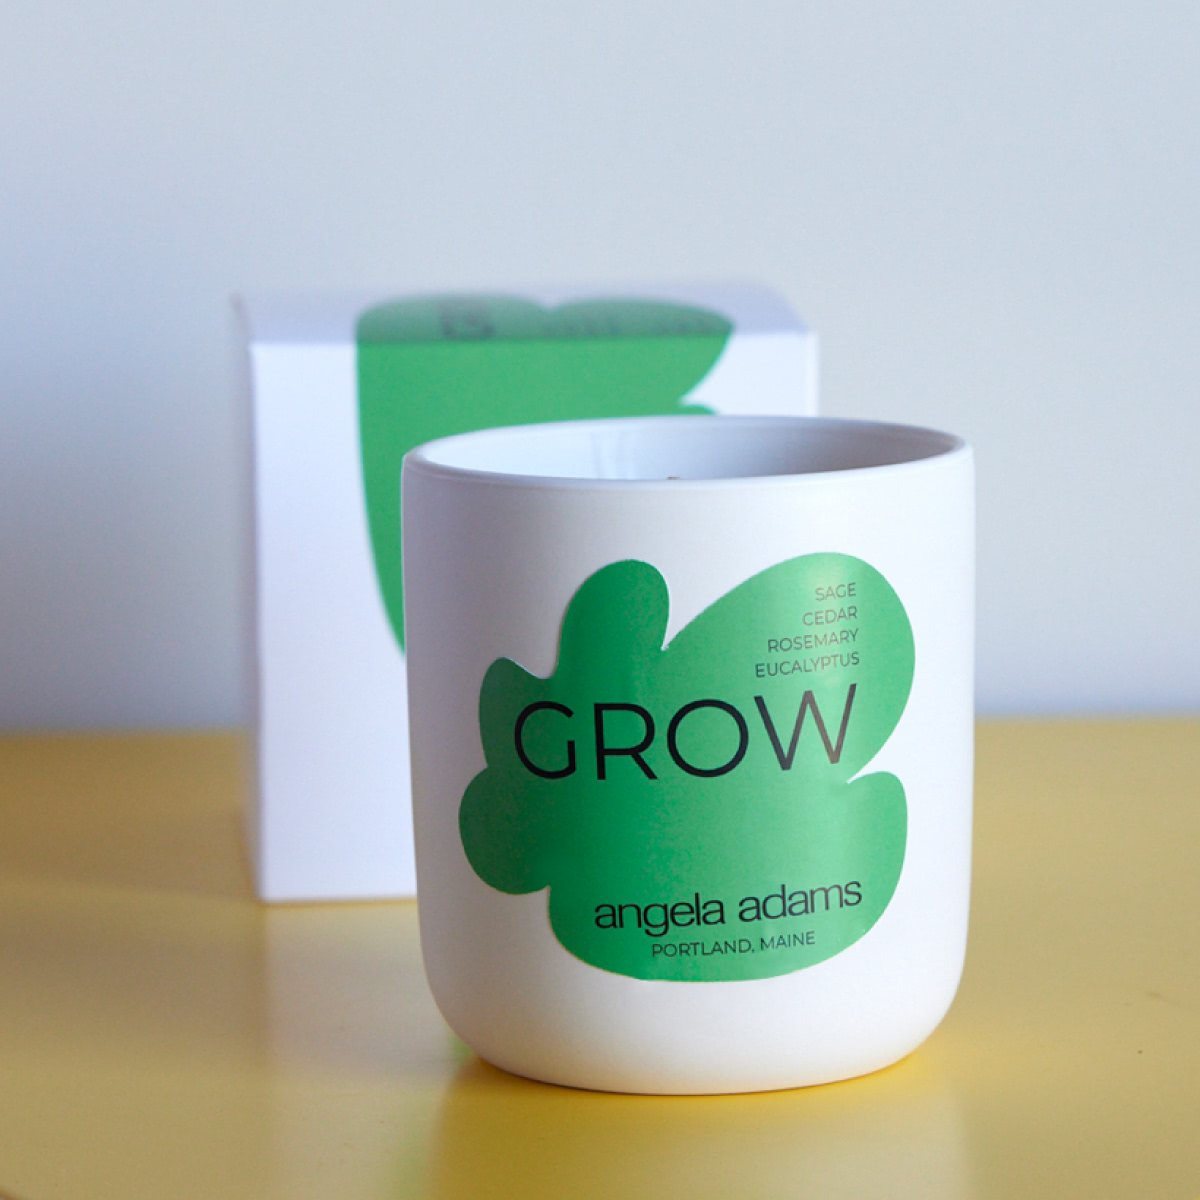 Angela Adams Grow Candle with green label